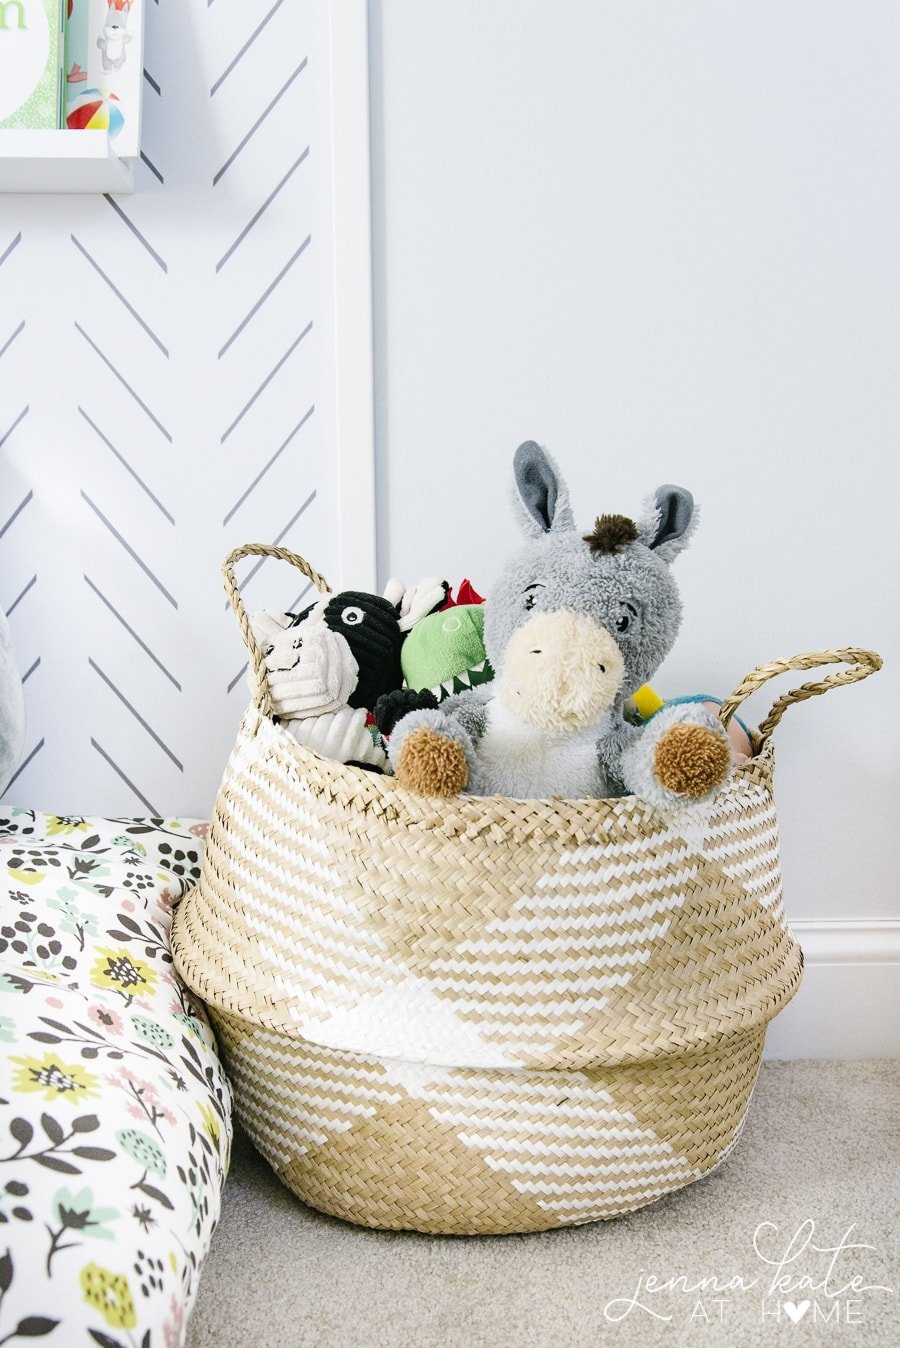 These baskets make great toy storage whether they are in a playroom or living room